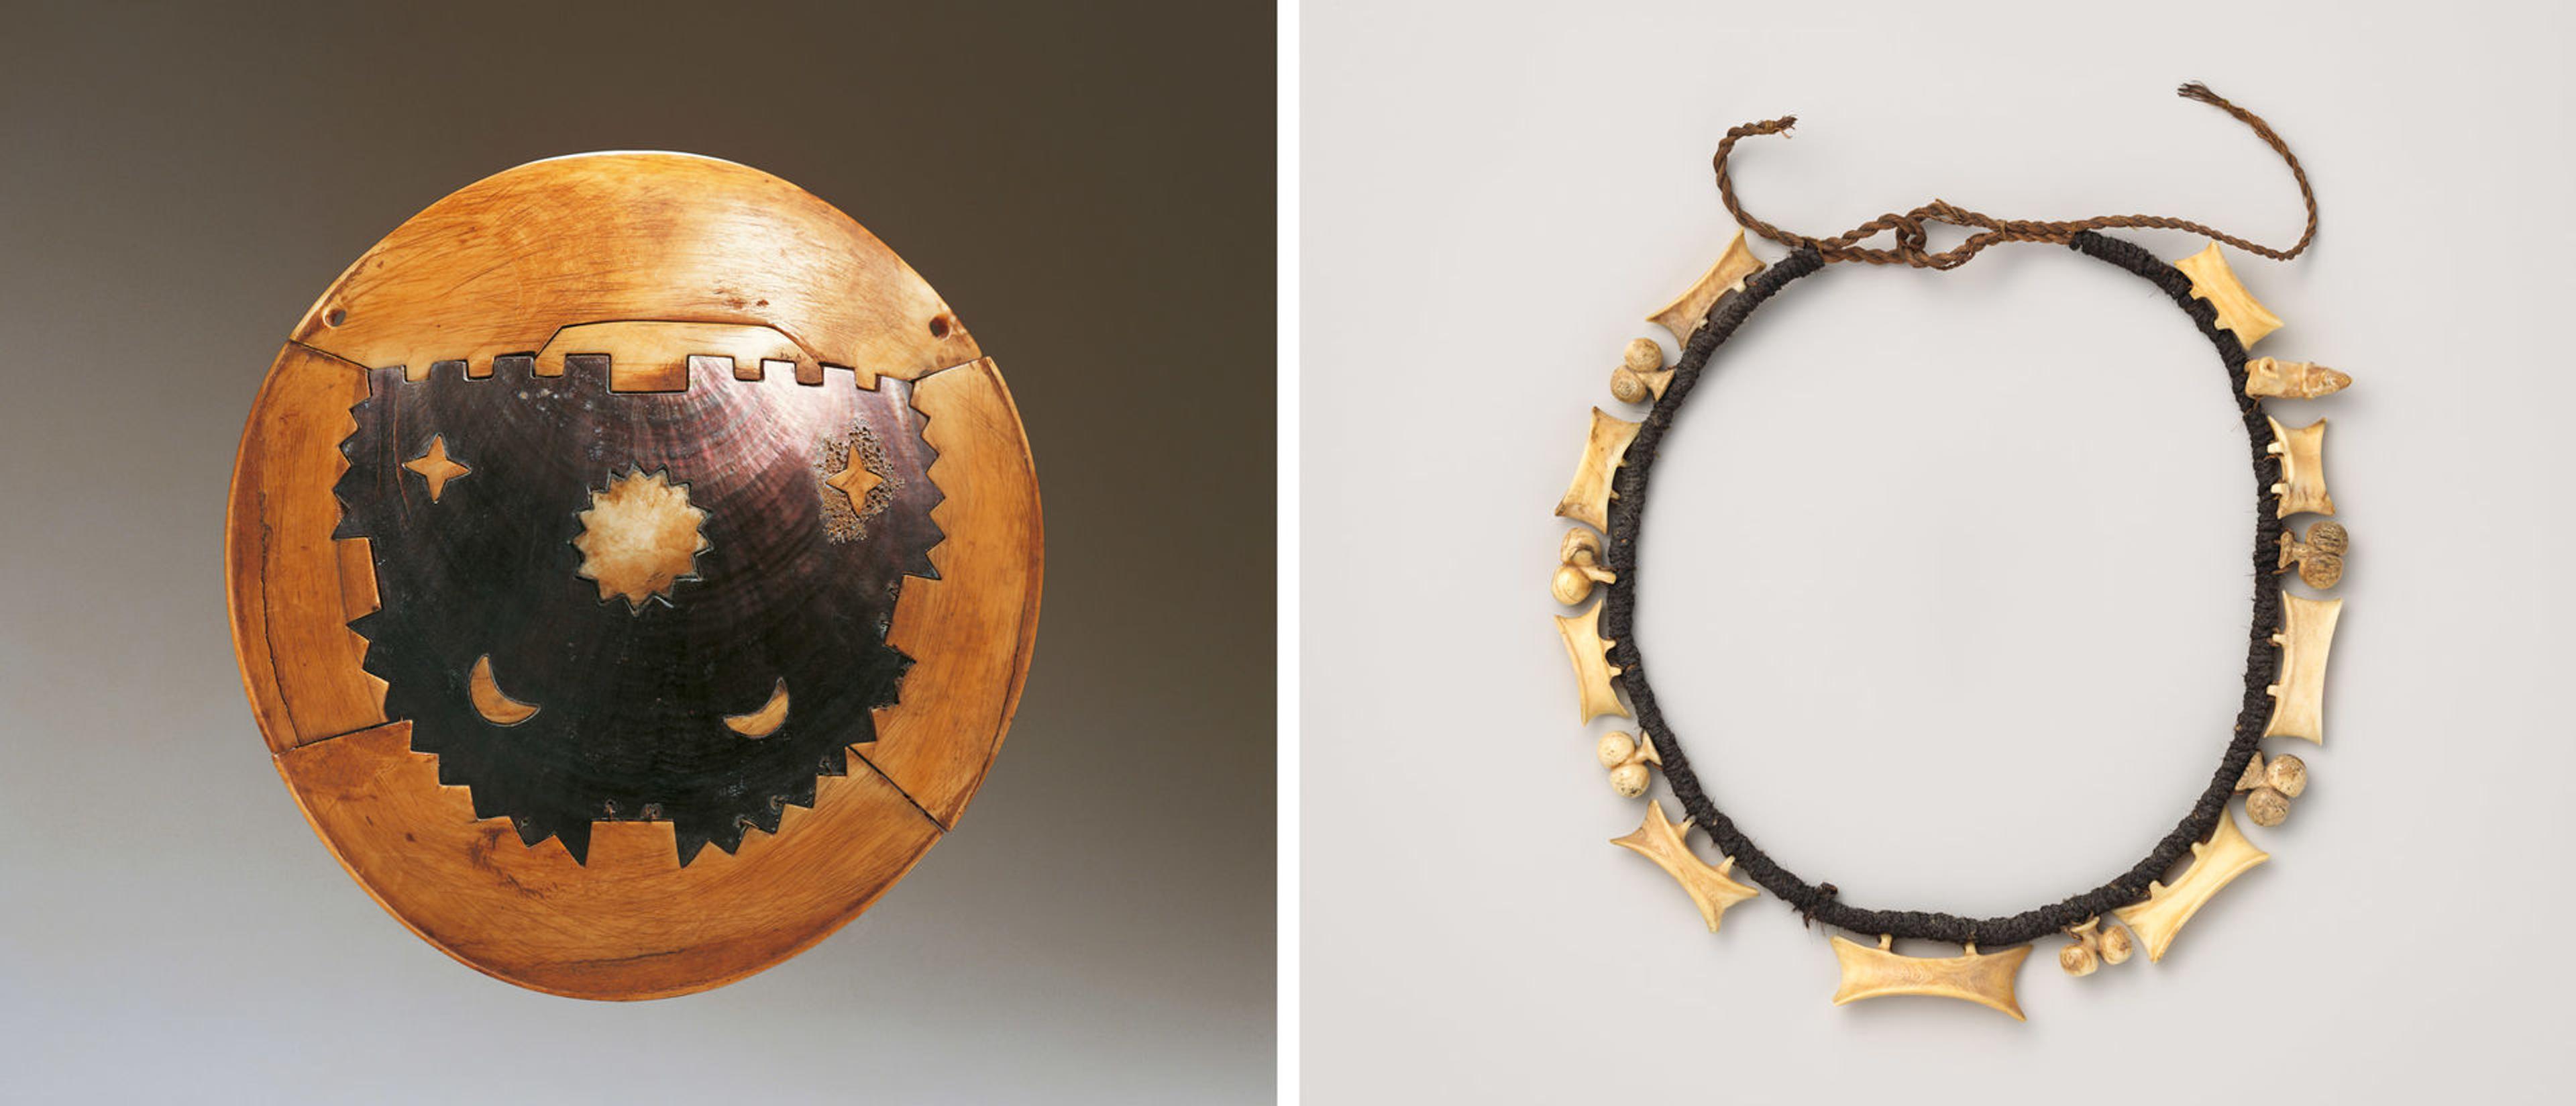 At left, a breastplate from Fiji made of black pearl shell and whale ivory. At right, an ornate necklace from the Austral Islands made of whalebone and ivory